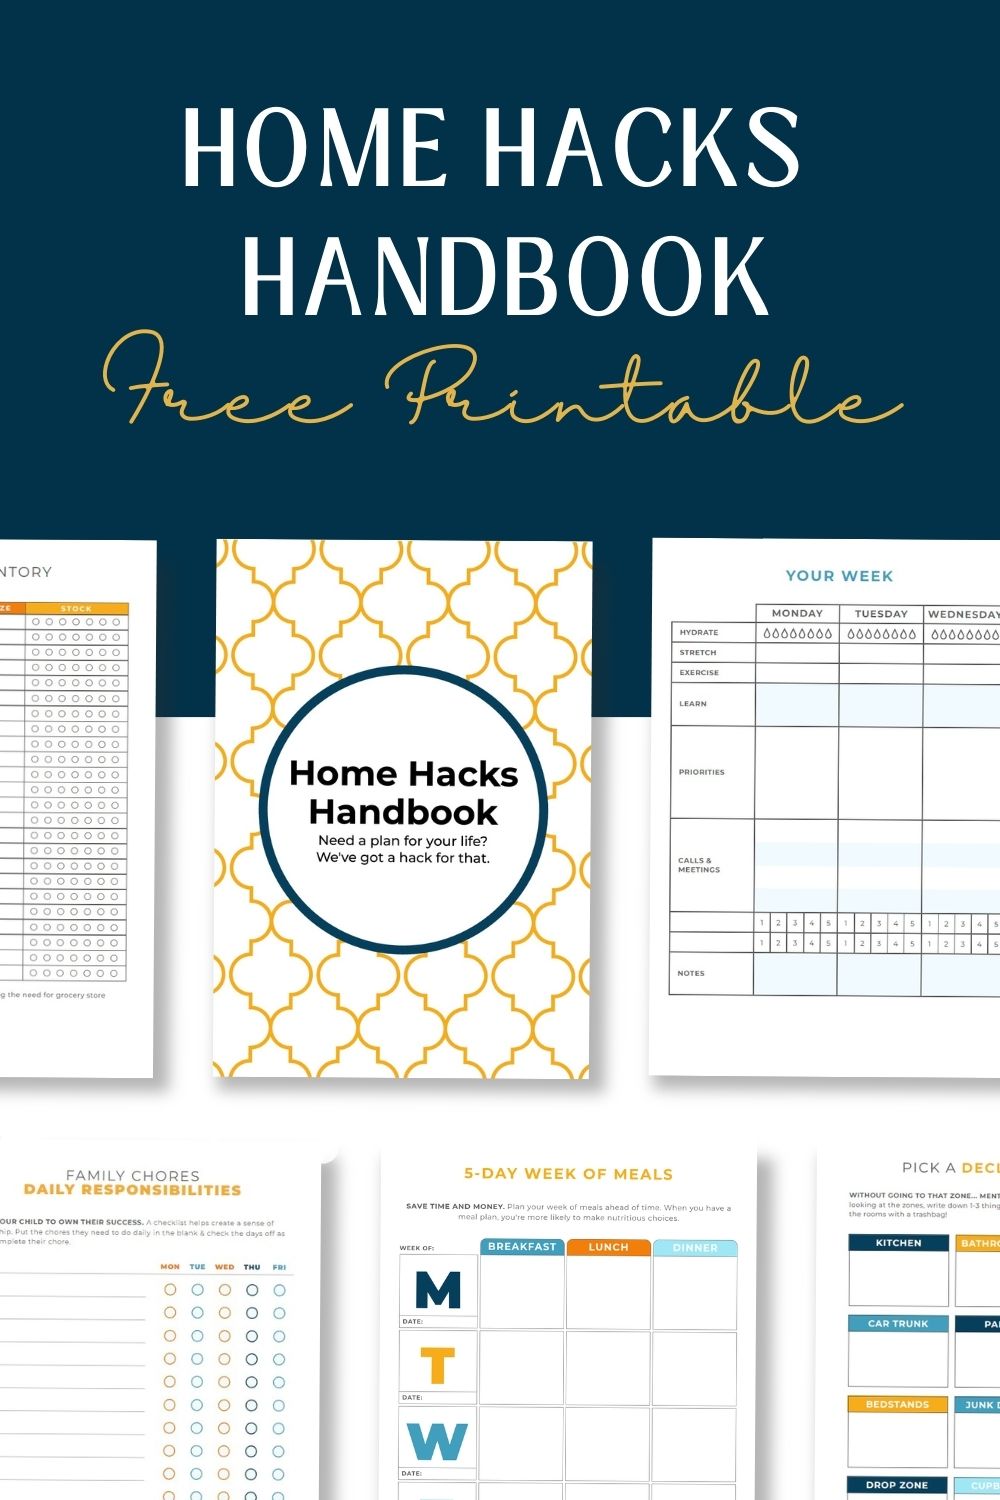 image shows the title and cover for the Home Hacks Handbook - a free printable workbook for organizing your life and home.